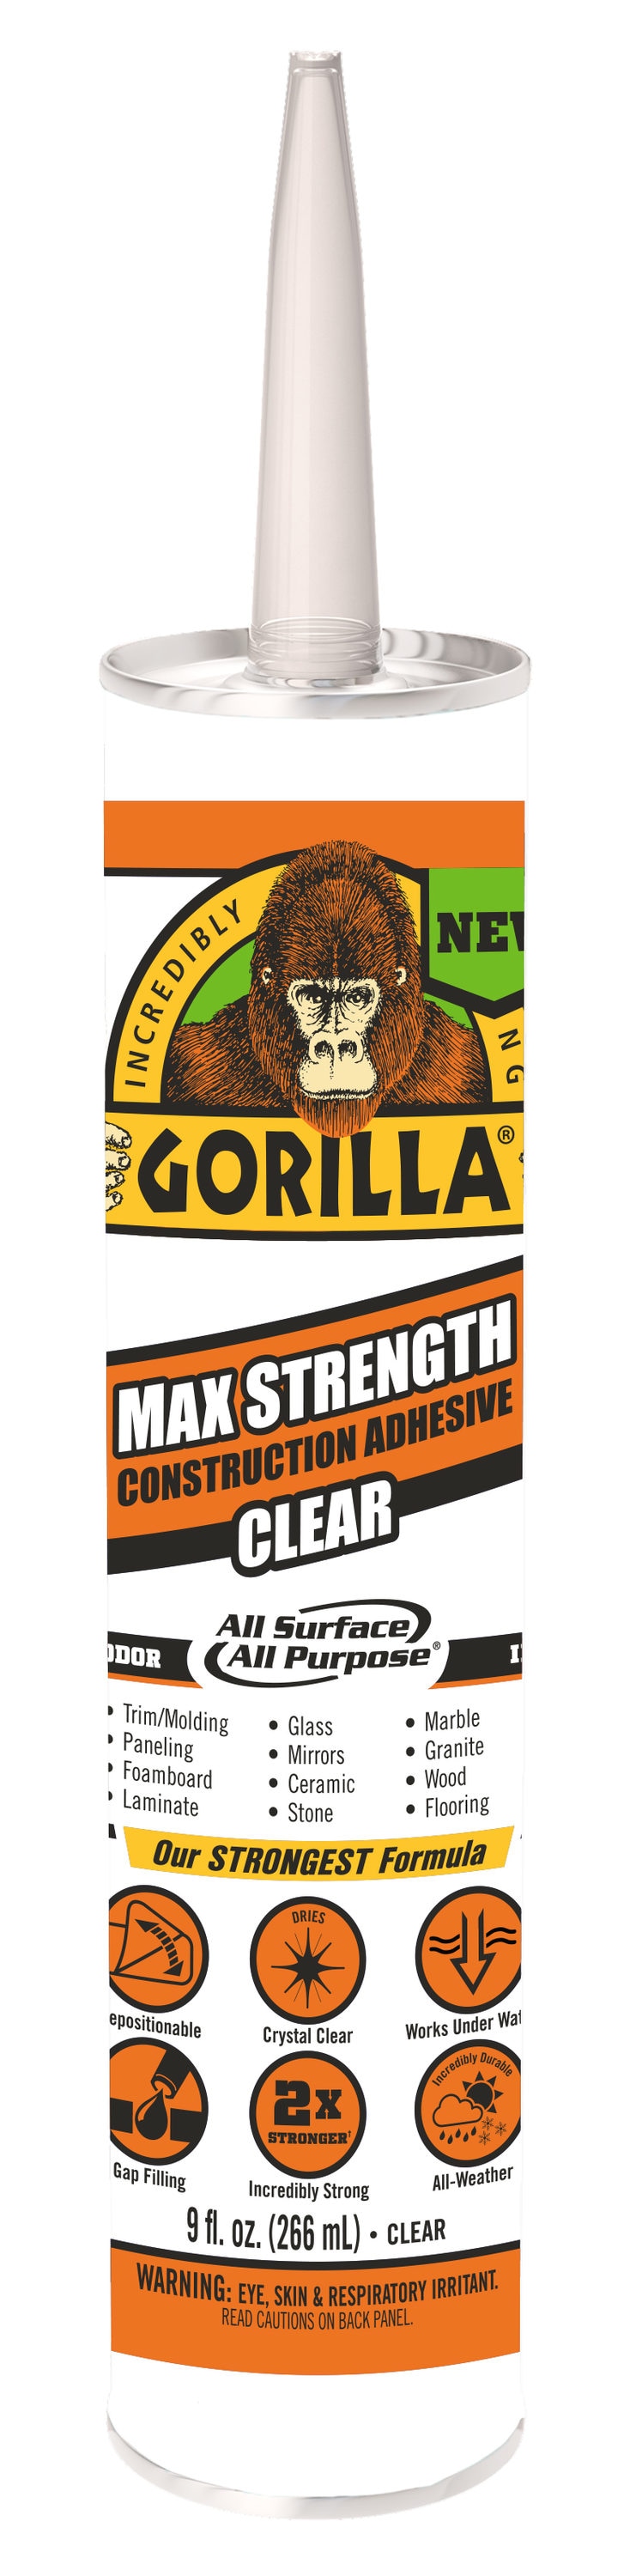 Gorilla Heavy Duty Spray Adhesive, Multipurpose and Repositionable, 4  Ounce, Clear, (Pack of 1)